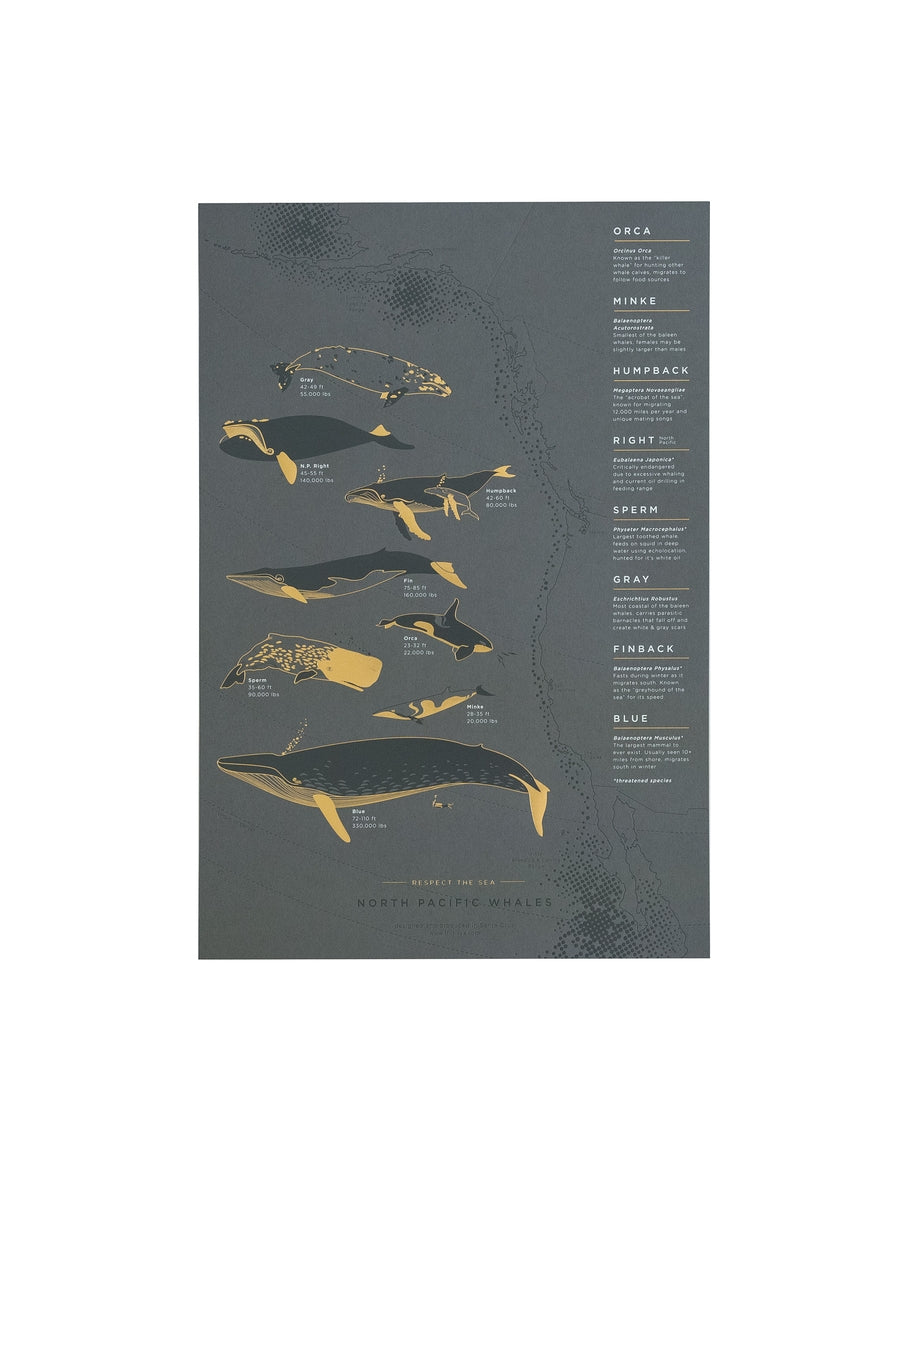 The North Pacific whale poster features eight whale species that migrate from Alaska to Mexico and back on an annual path of travel along the west coast, through the pacific waters. Great reference art that is both elegant and useful for your kitchen, dining room or kids room!